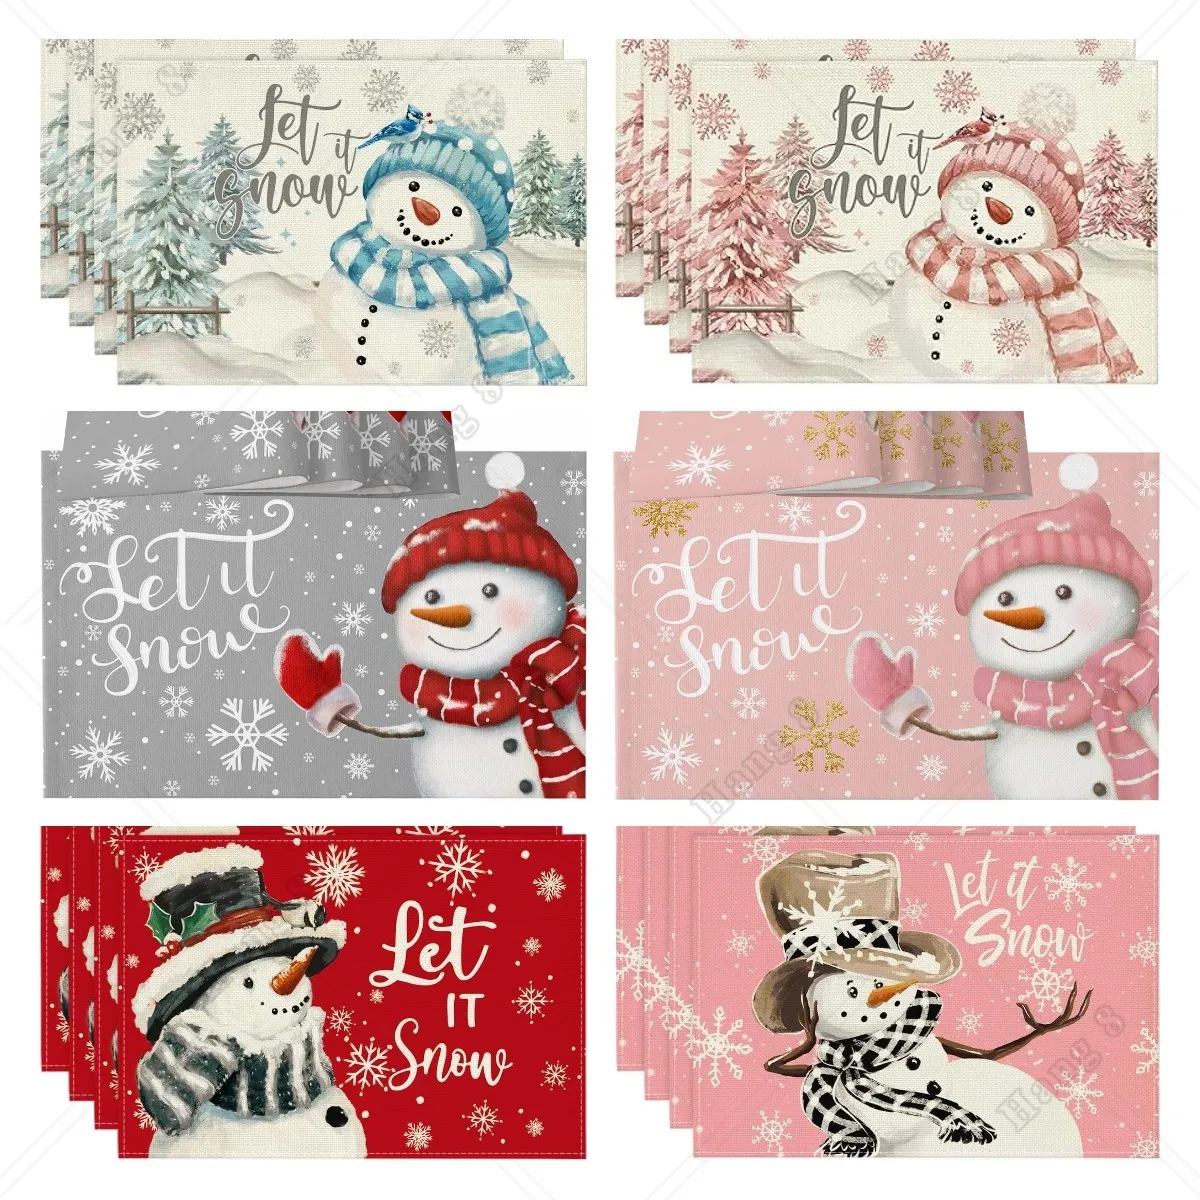 

Xmas Trees Let It Snow Pink Snowman Christmas Placemats Set of 4 12x18 Inch Winter Table Mats for Party Kitchen Dining Decor